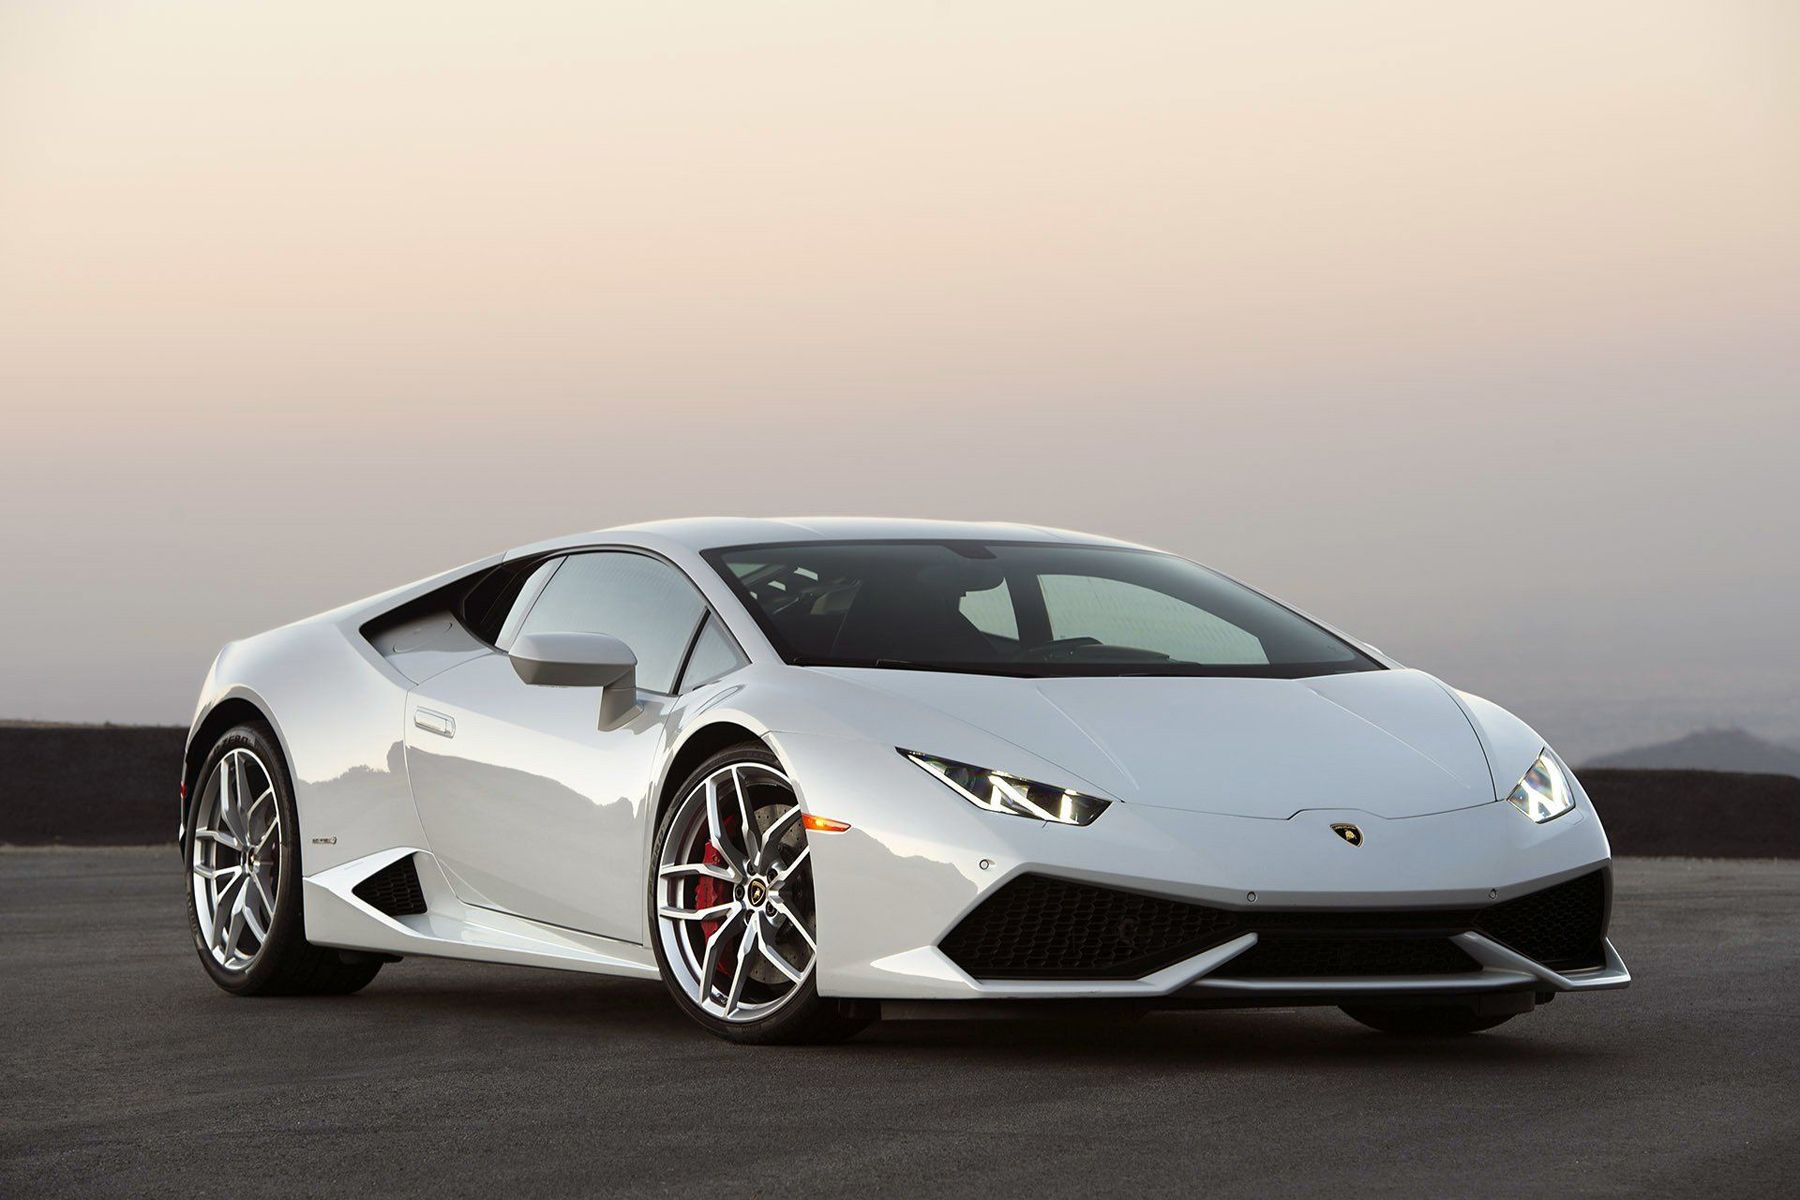 News Roundup: A white Lambo that looks yellow, and how to fool a Tesla with  a video projector